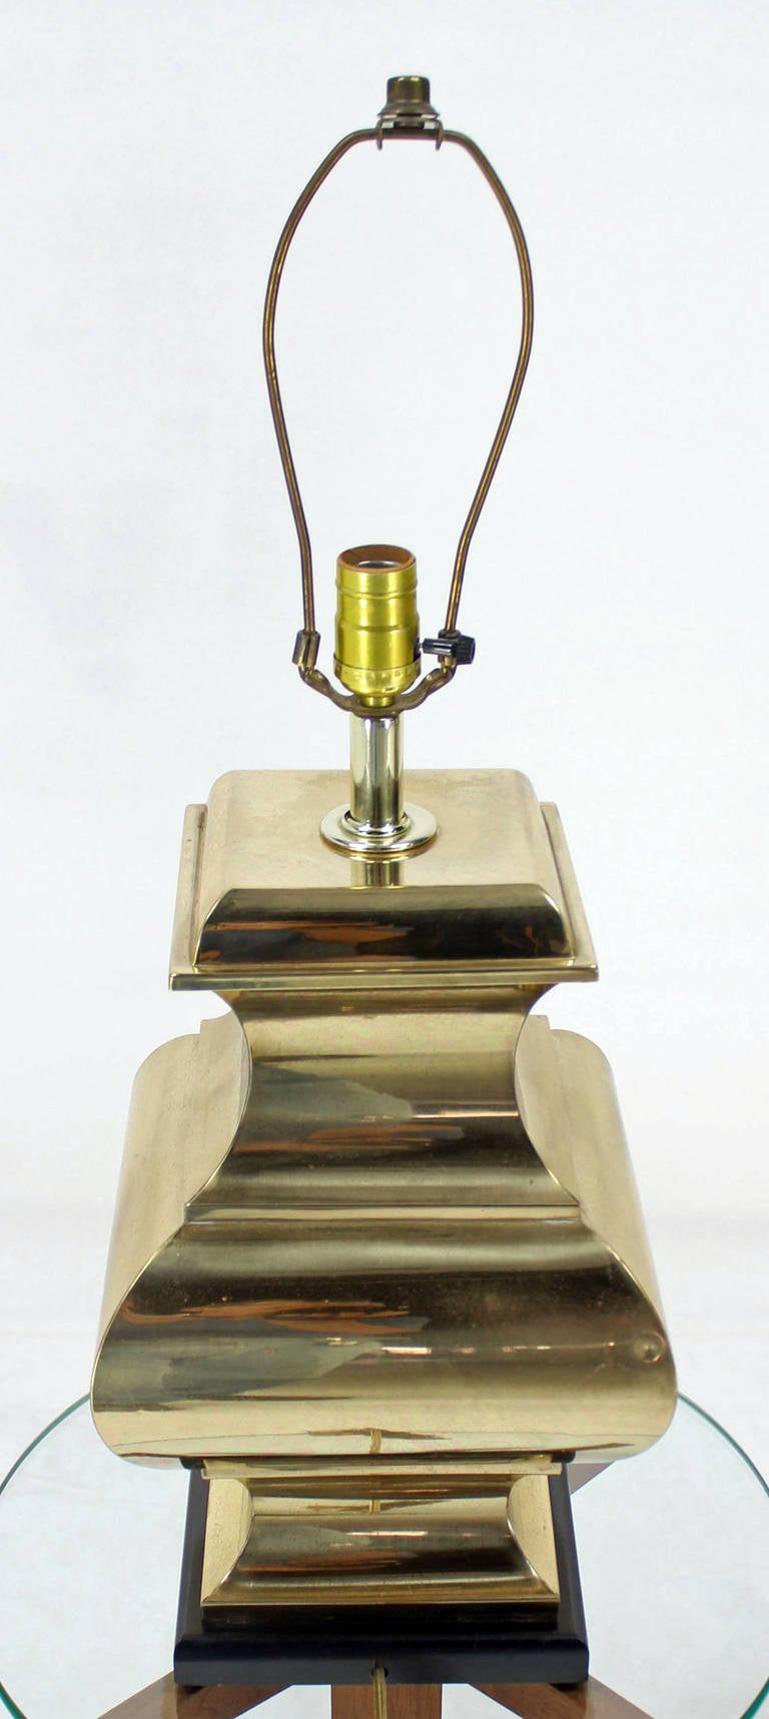 Pair of Modern Polished Brass Table Lamps